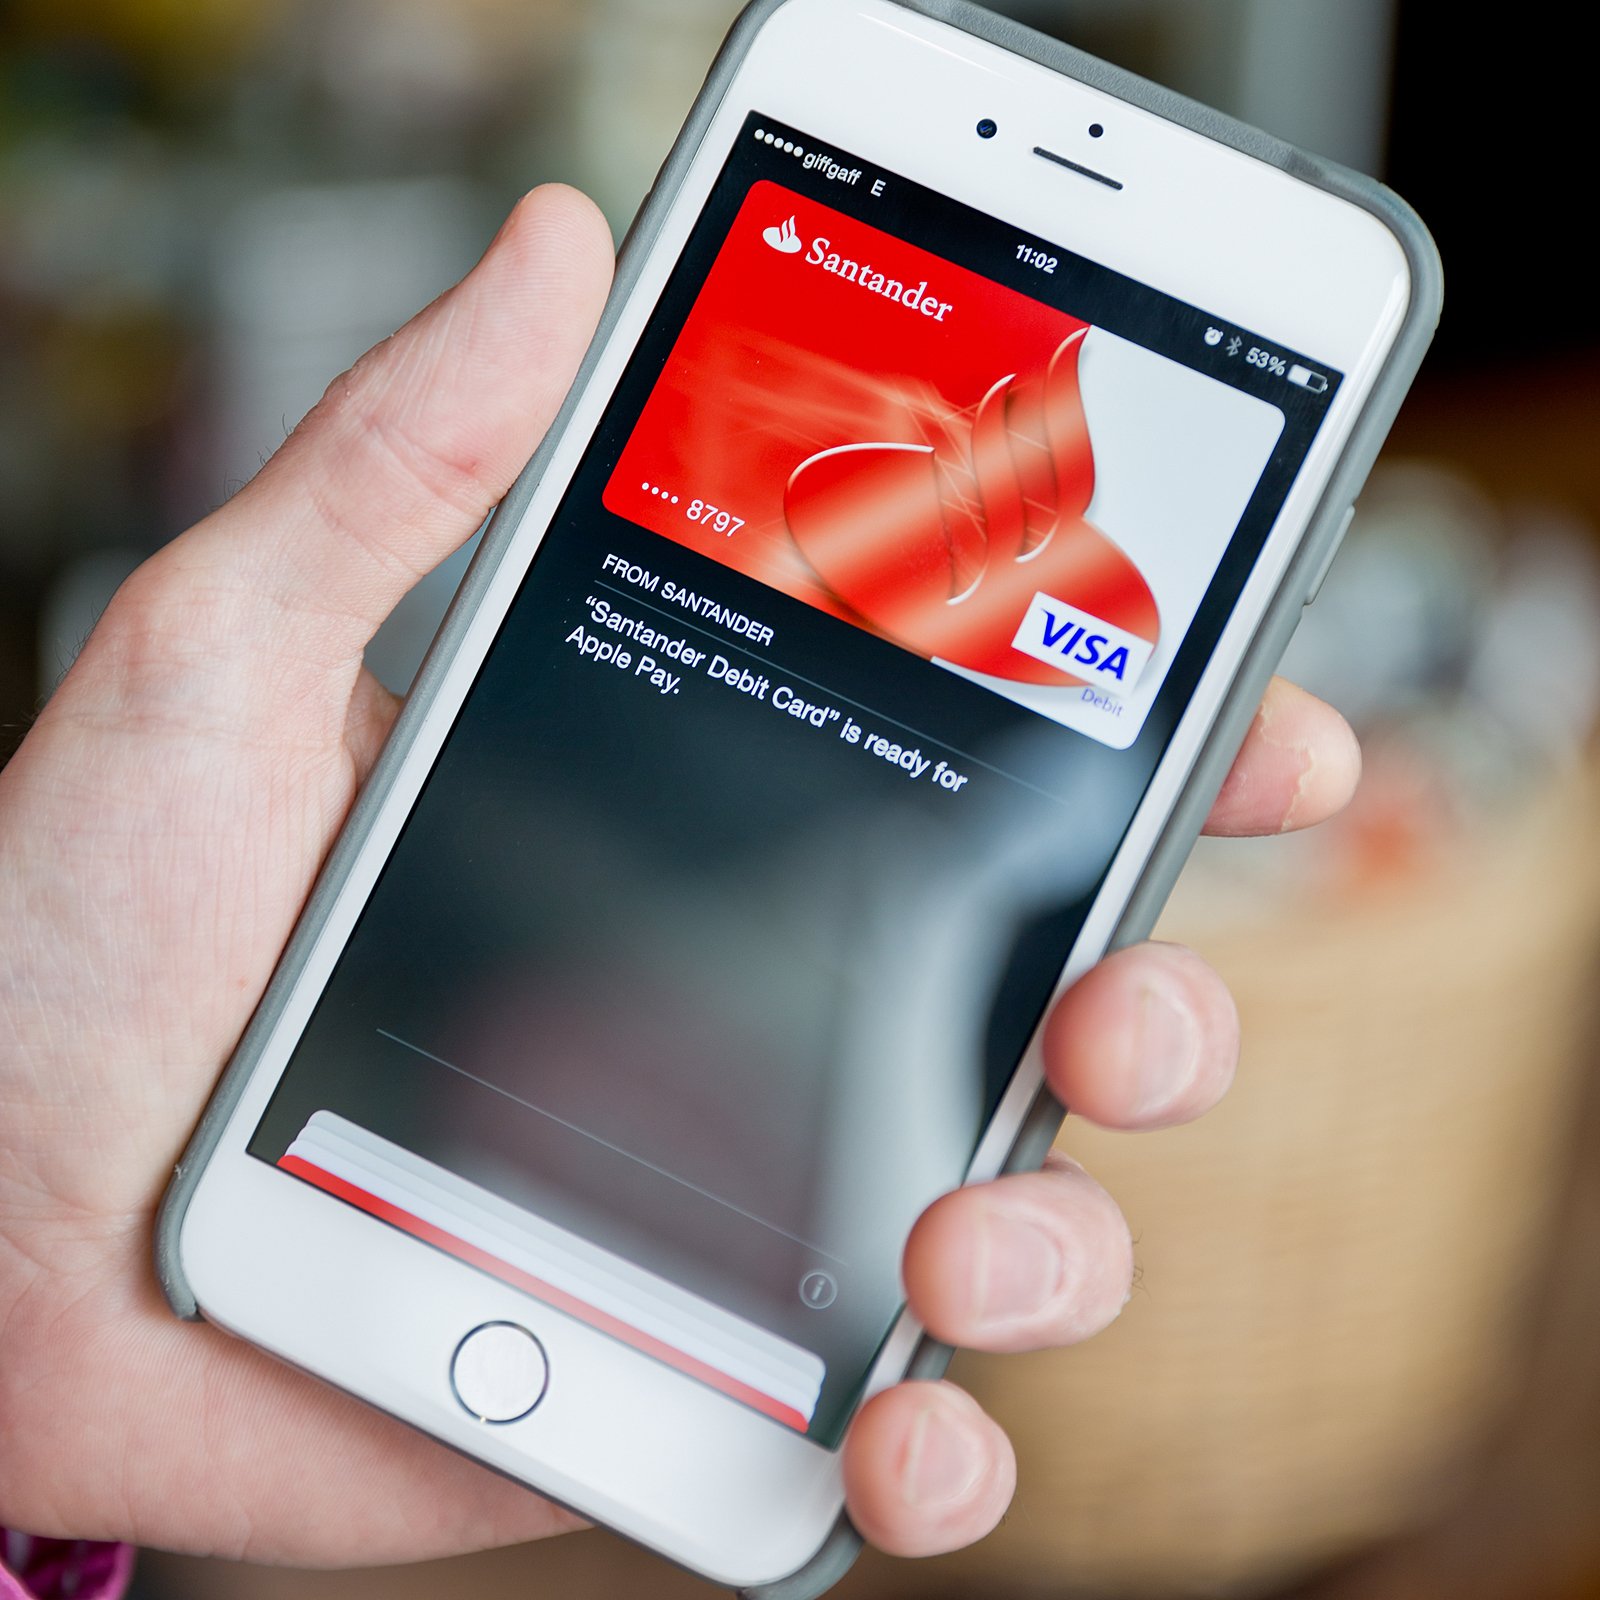 How to set up &  use Apple Pay on your iPhone